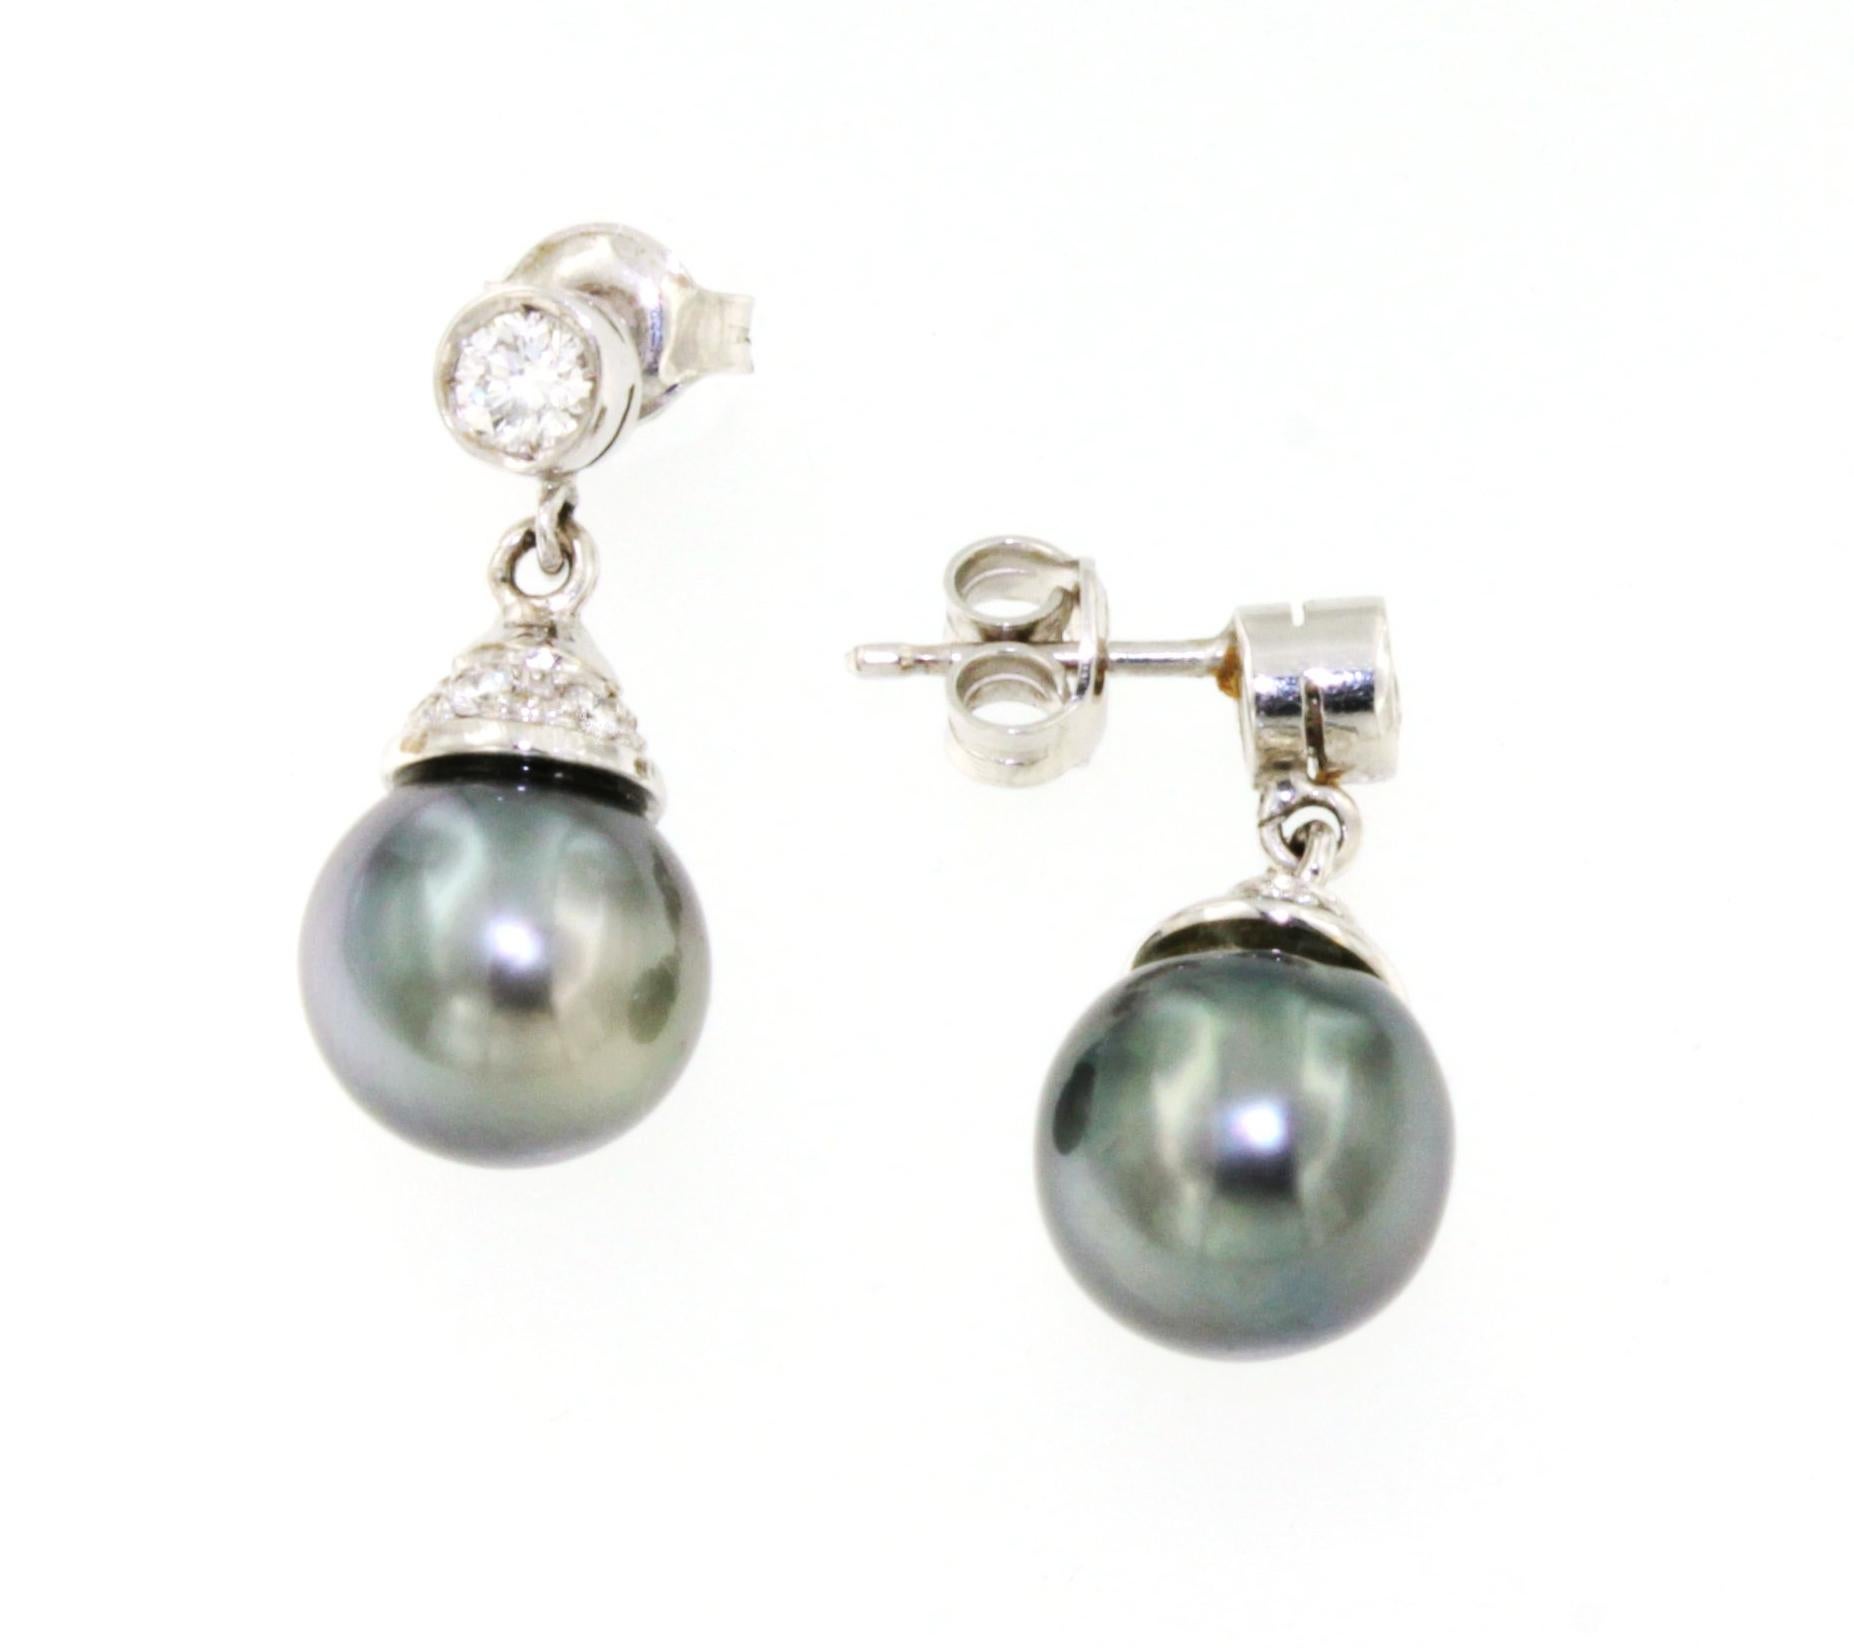 Classic and fashion Earrings in 18k white gold with Tahiti Pearl made in Italy by Stanoppi Jewellery since 1948

All Stanoppi Jewelry is new and has never been previously owned or worn. Each item will arrive at your door beautifully gift wrapped in